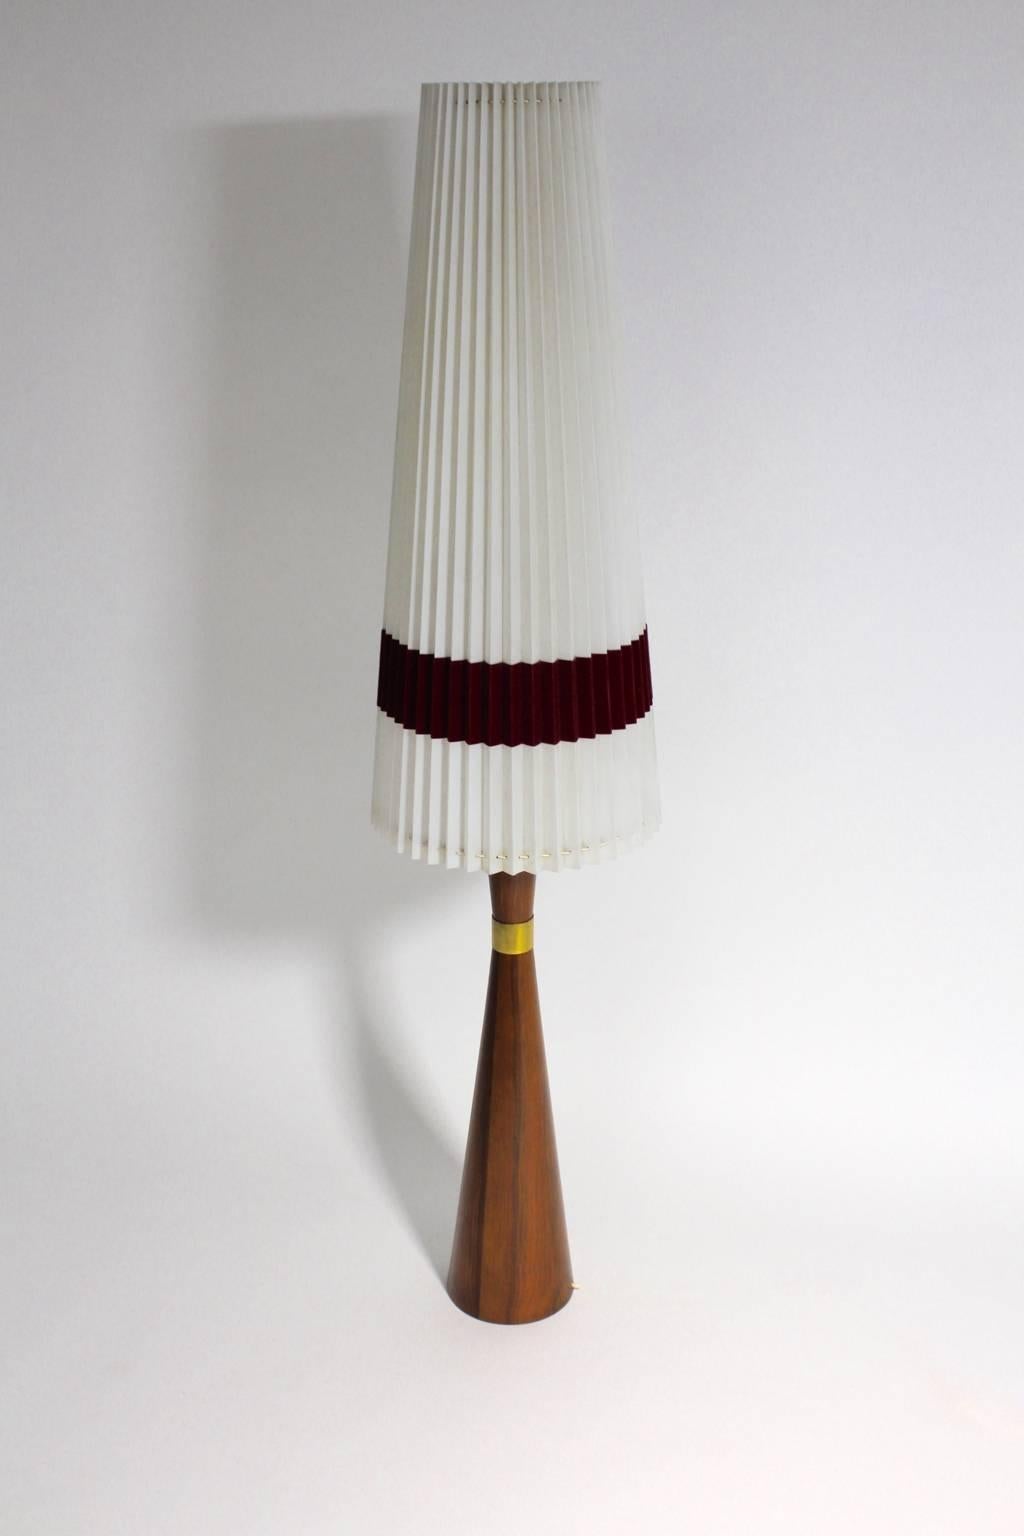 Scandinavian modern vintage teak table or floor lamp with a beautiful teak veneer, which is decorated with a brass details.
The original shade is made of nylon with a Bordeaux velvet ribbon along the bottom.